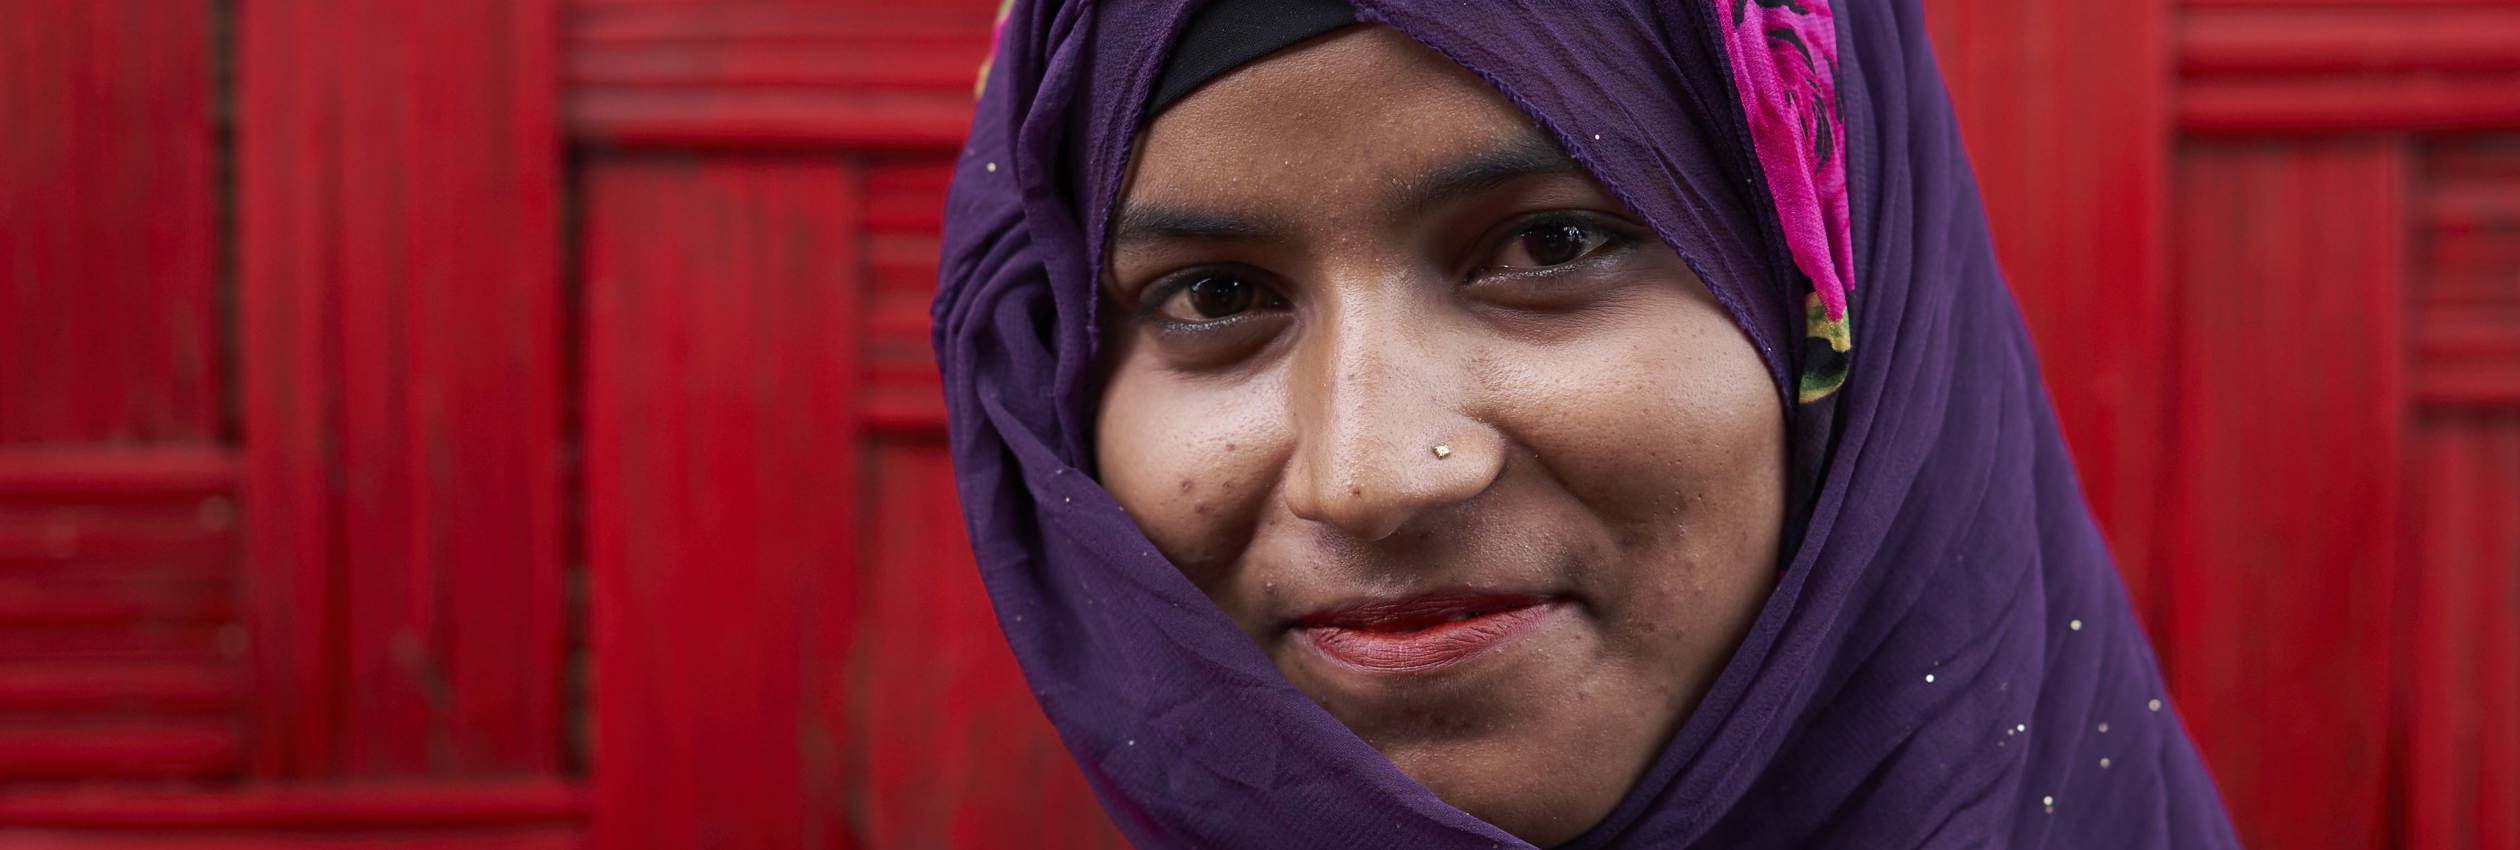 Rozaina Akhtar, 18, poses for a photograph outside the Dream Garden Adolescent Club, a safe space for Rohingya refugee women between the ages of 15-24, where she is one of the co-facilitators, in Camp 4, at the Kutupalong Expansion Site for Rohingya refugees, Ukhia, Cox's Bazar District, Bangladesh.